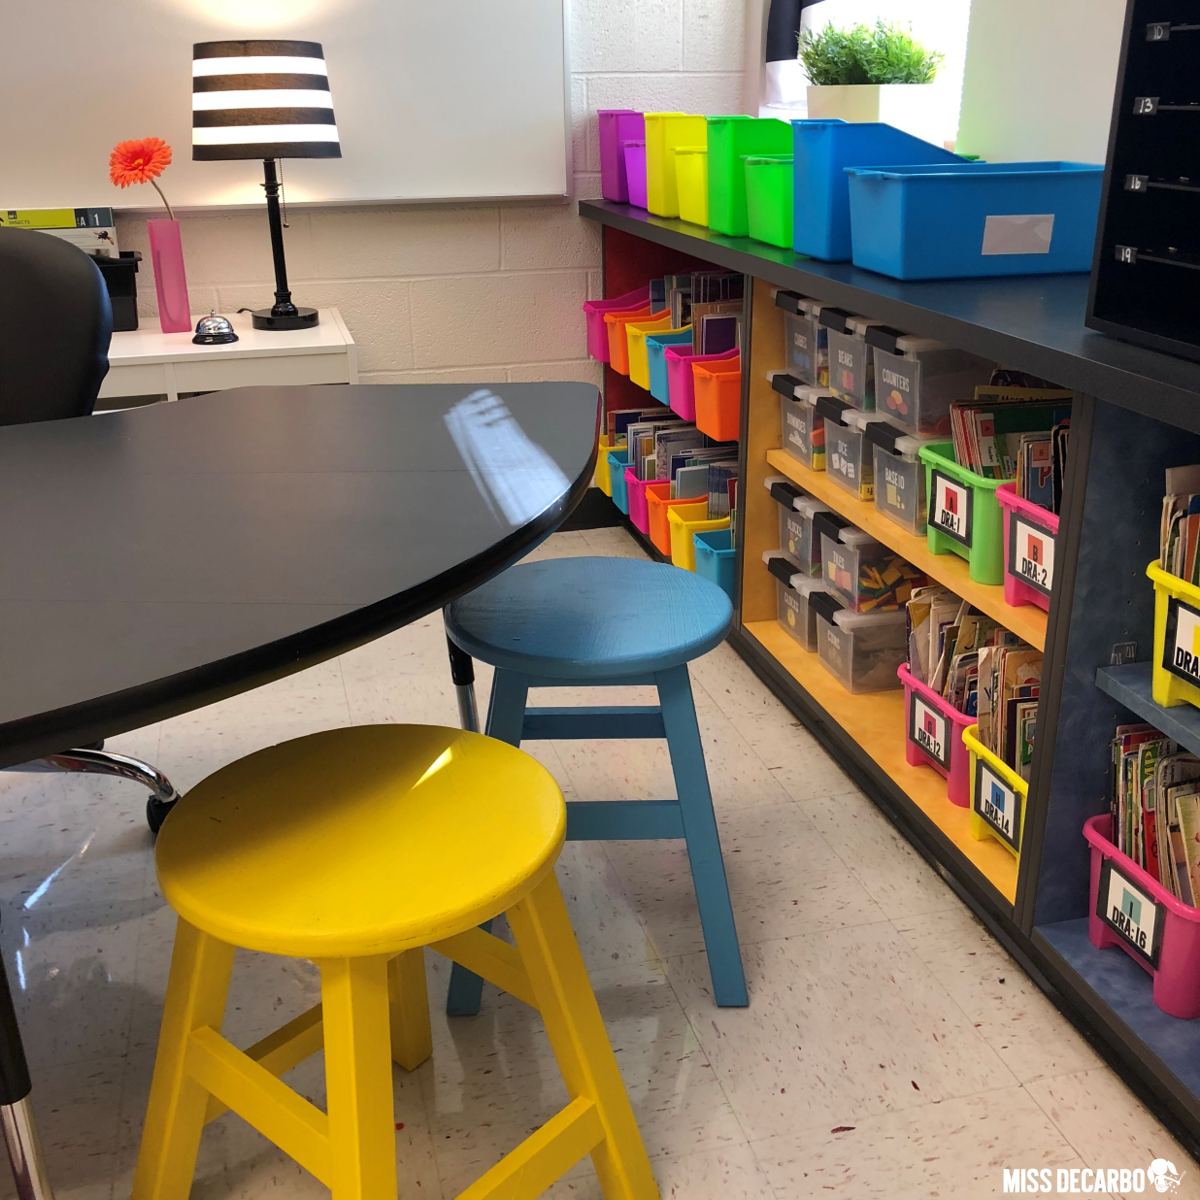 Cover the small group table in your classroom with contact paper to give it a new look!